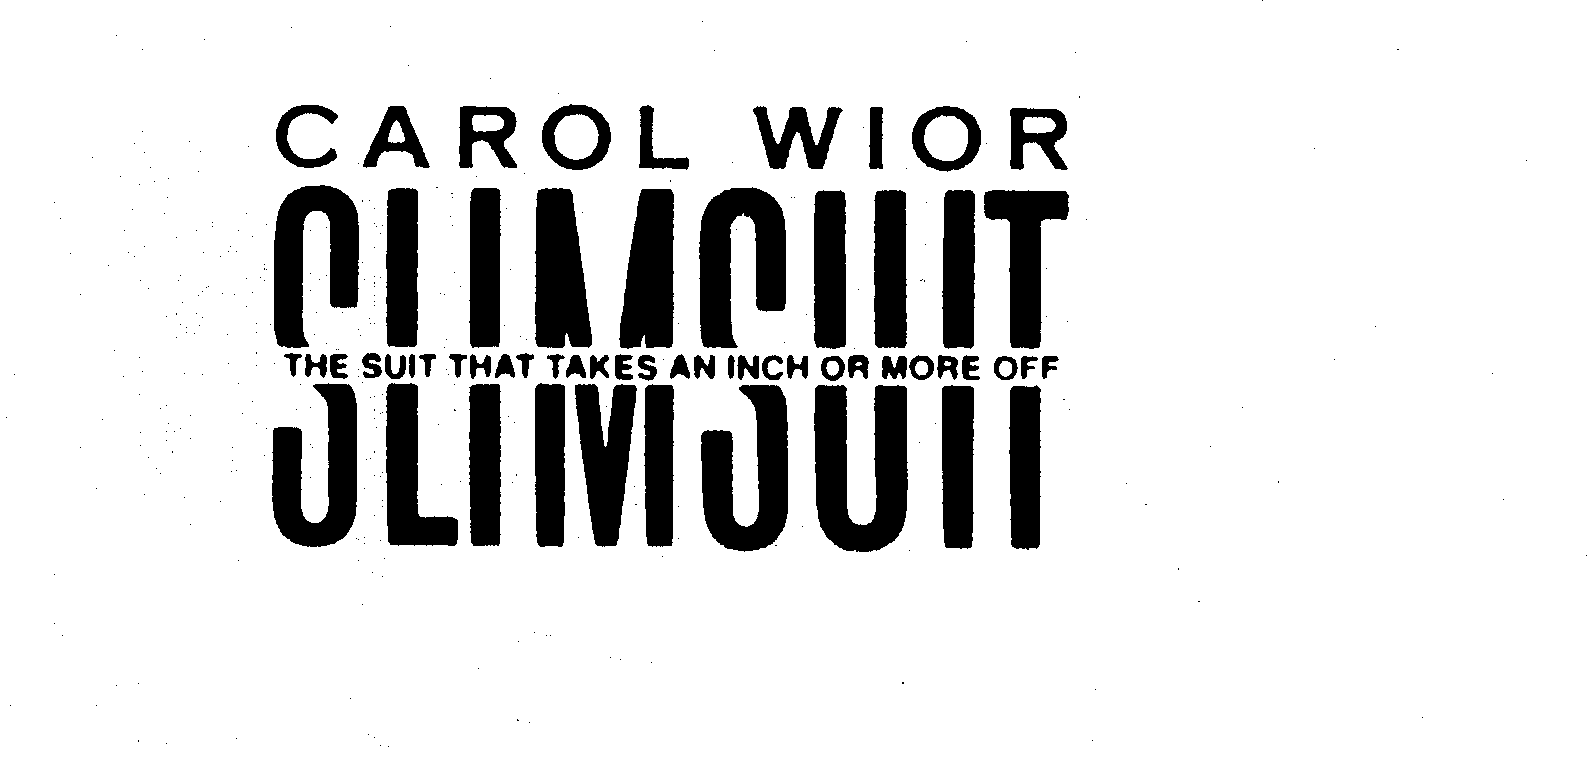  CAROL WIOR SLIMSUIT THE SUIT THAT TAKESAN INCH OR MORE OFF